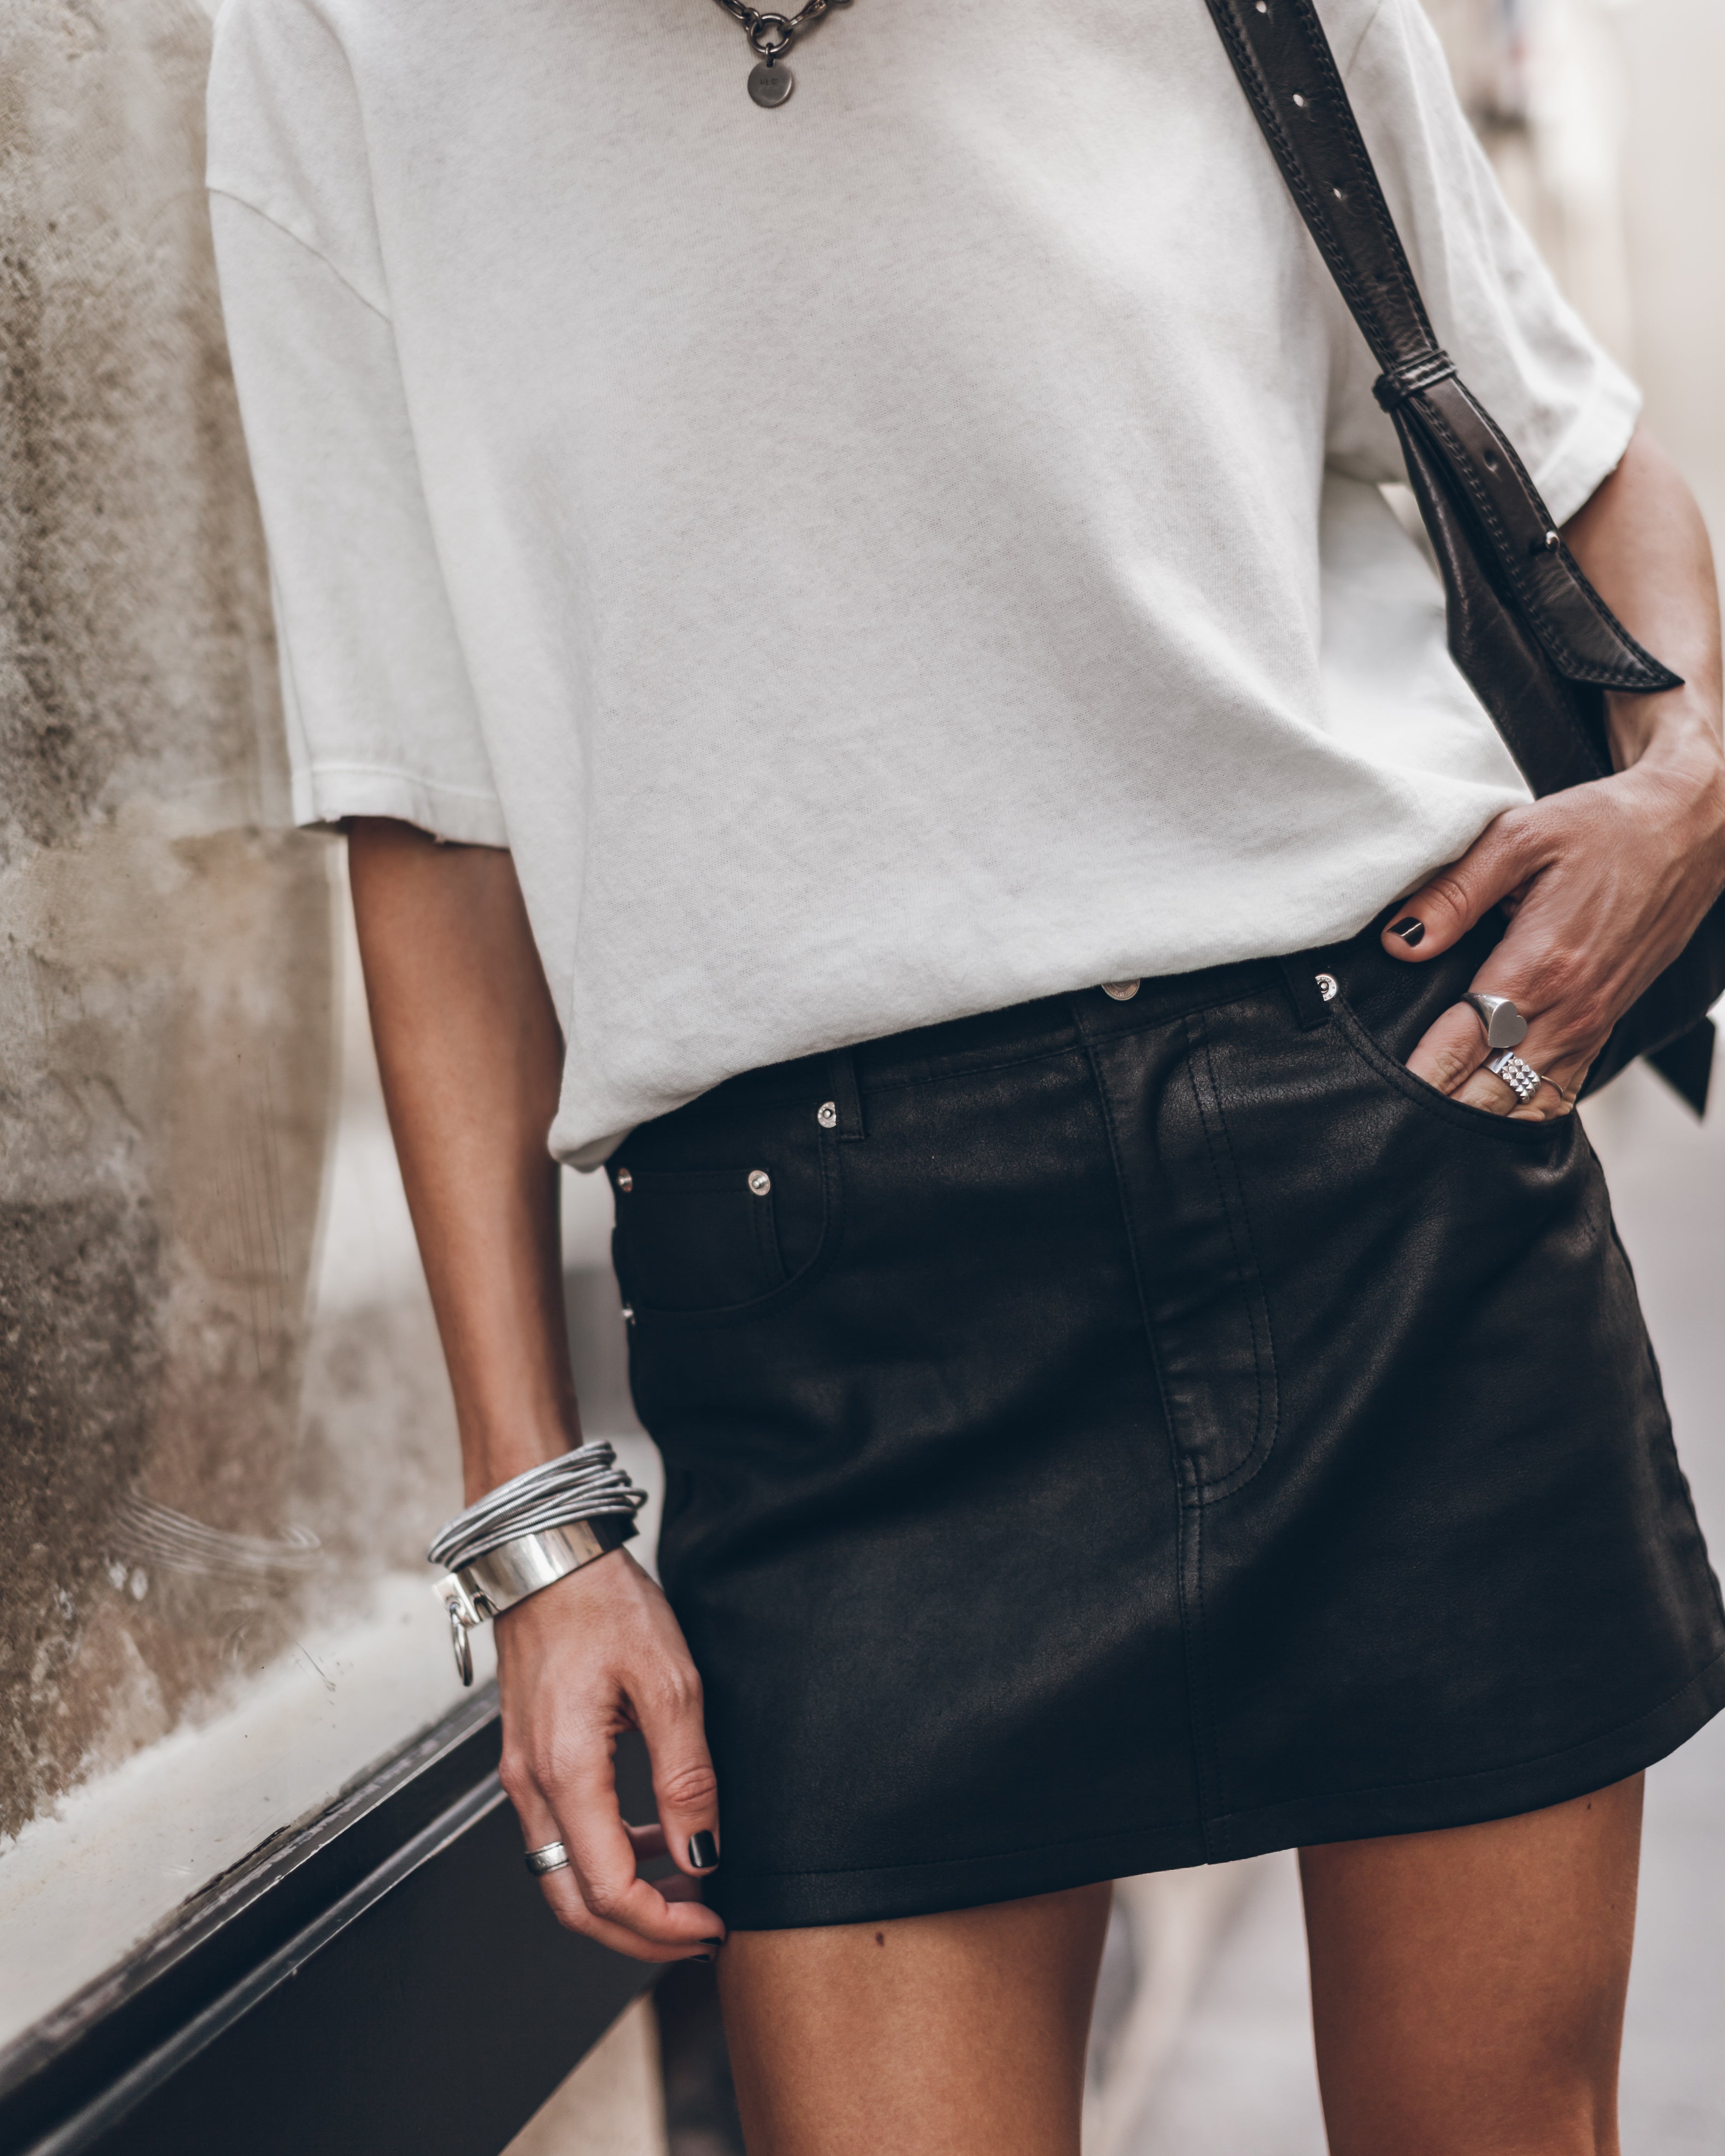 The Leather Skirt